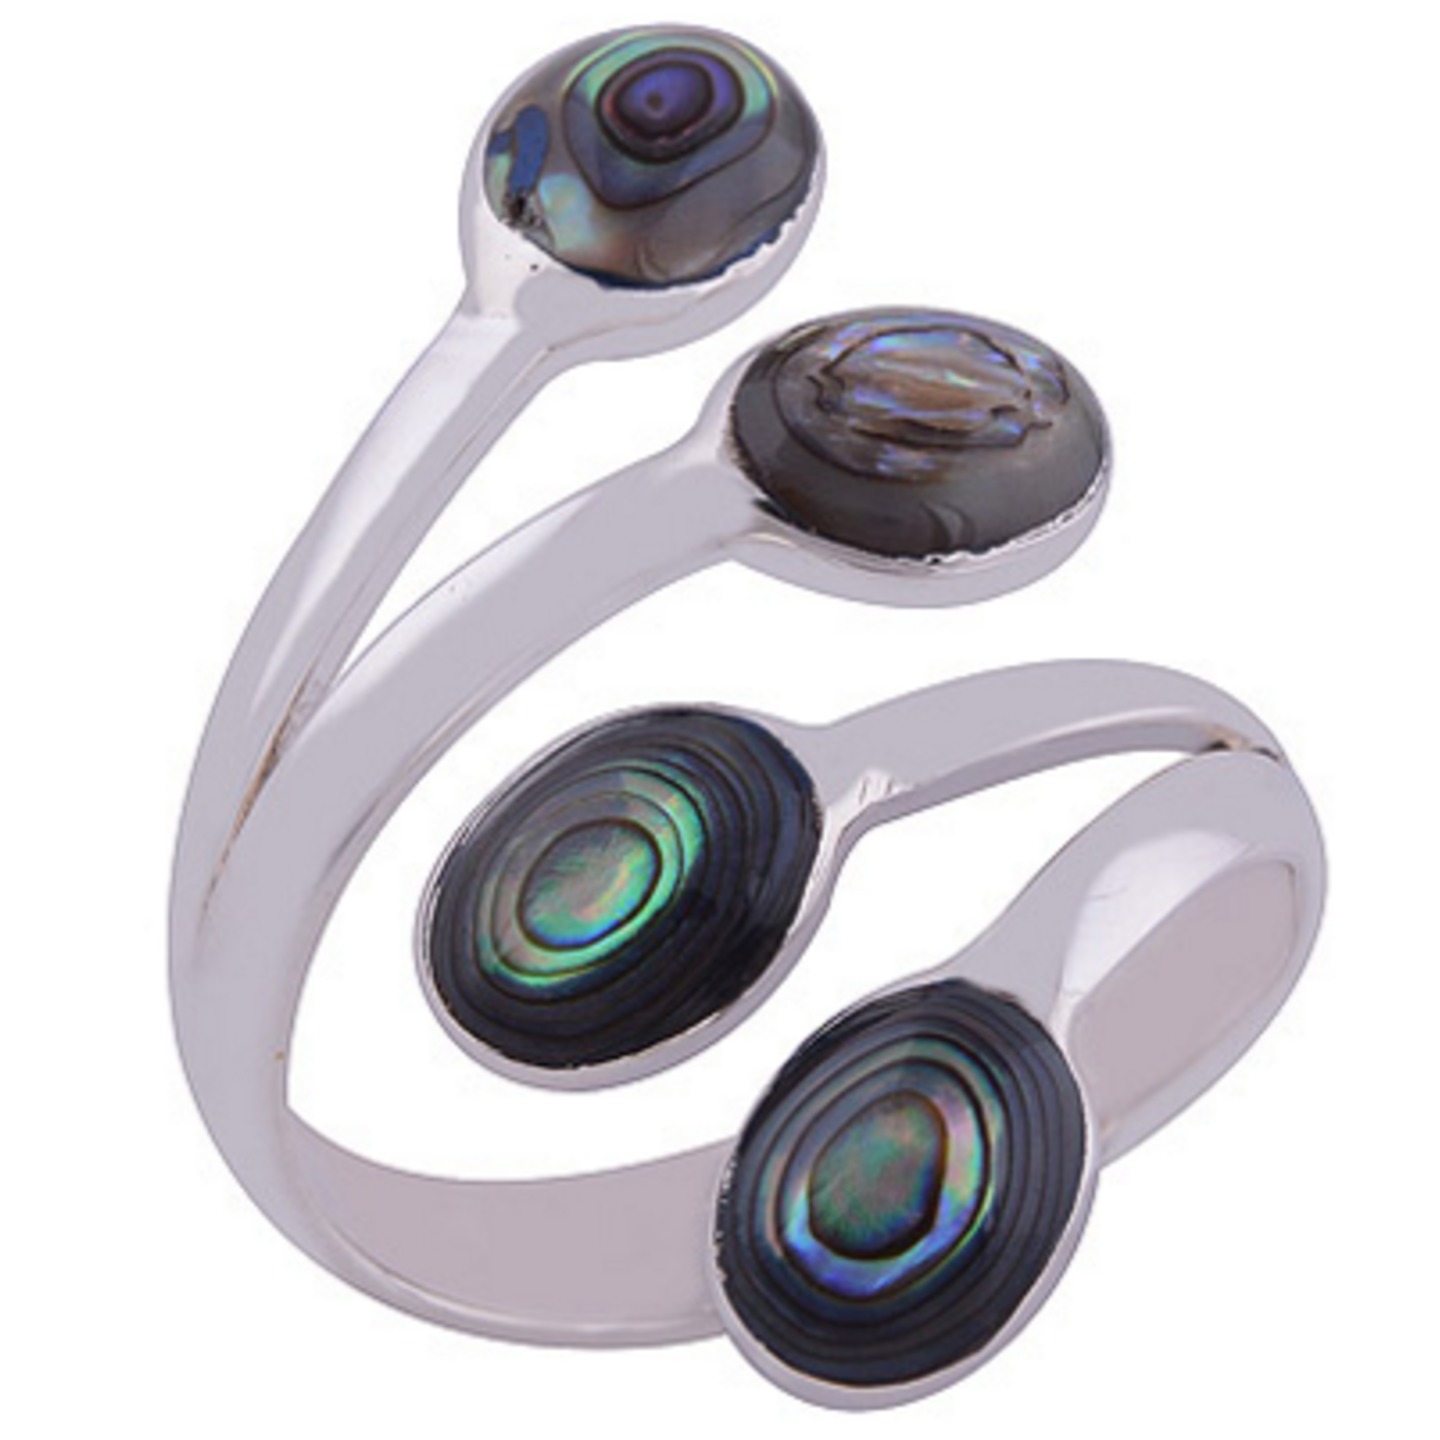 The Abalone Bud Silver Ring